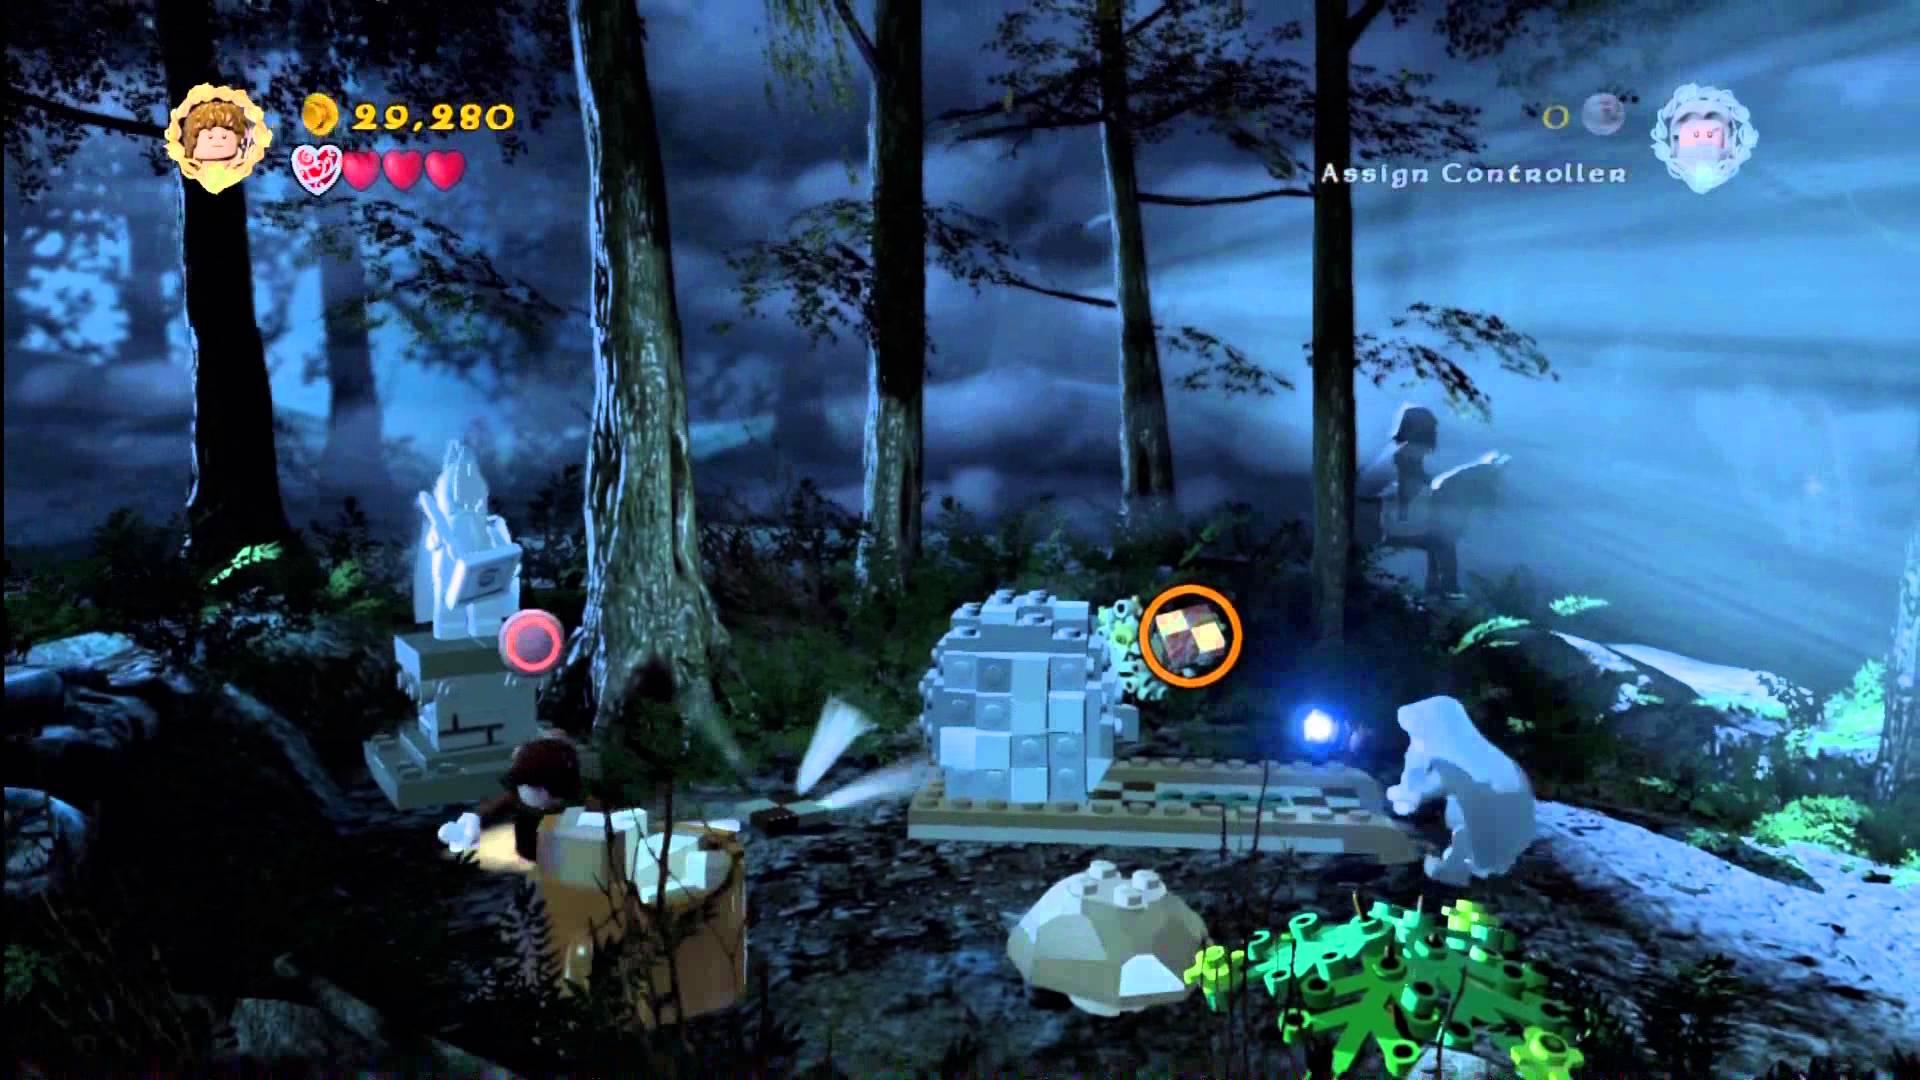 Lego Lord Of The Rings: Level 2 The Black Rider FREE PLAY